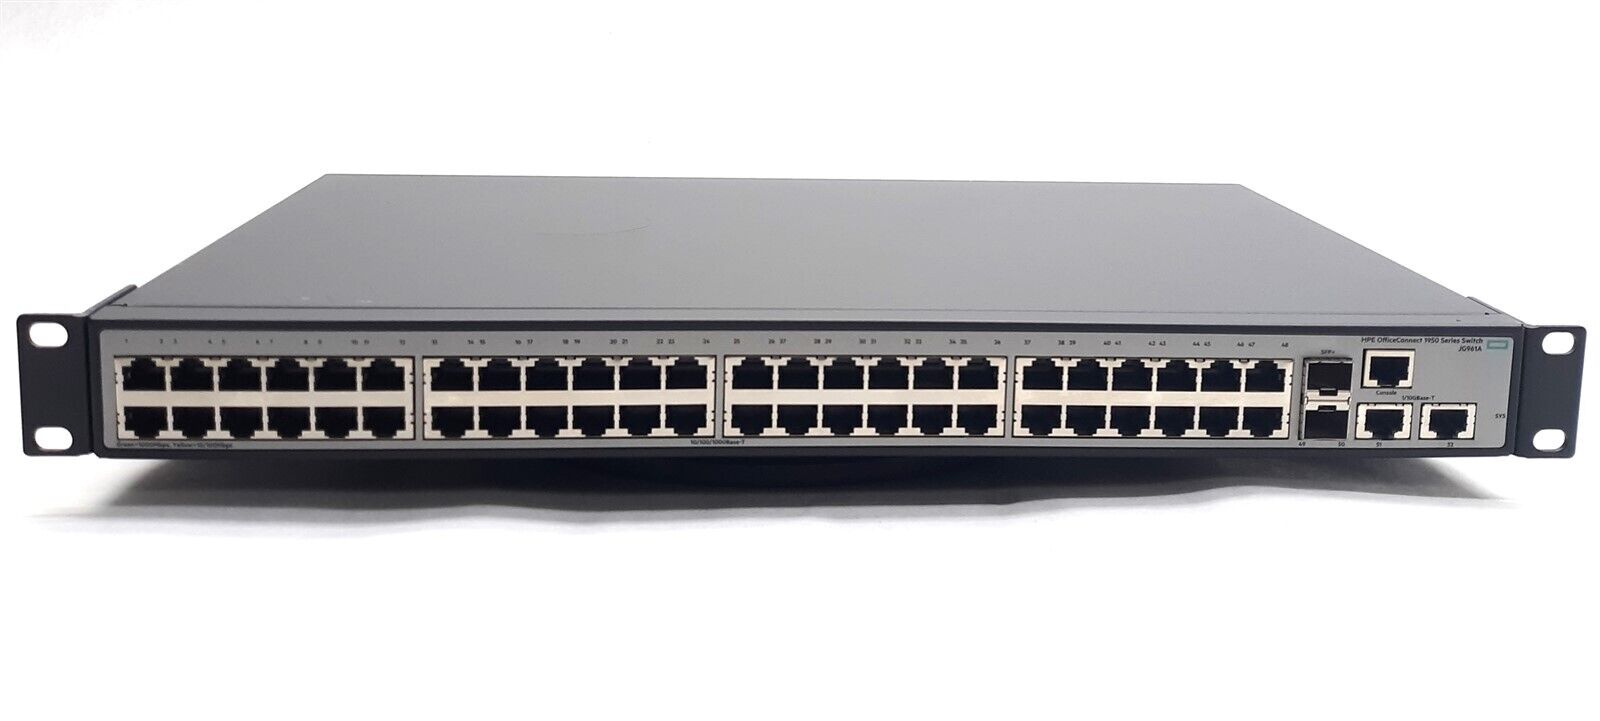 HPE Officeconnect 1950-48G-2SFP+2XGT Ethernet Network Switch JG96A1